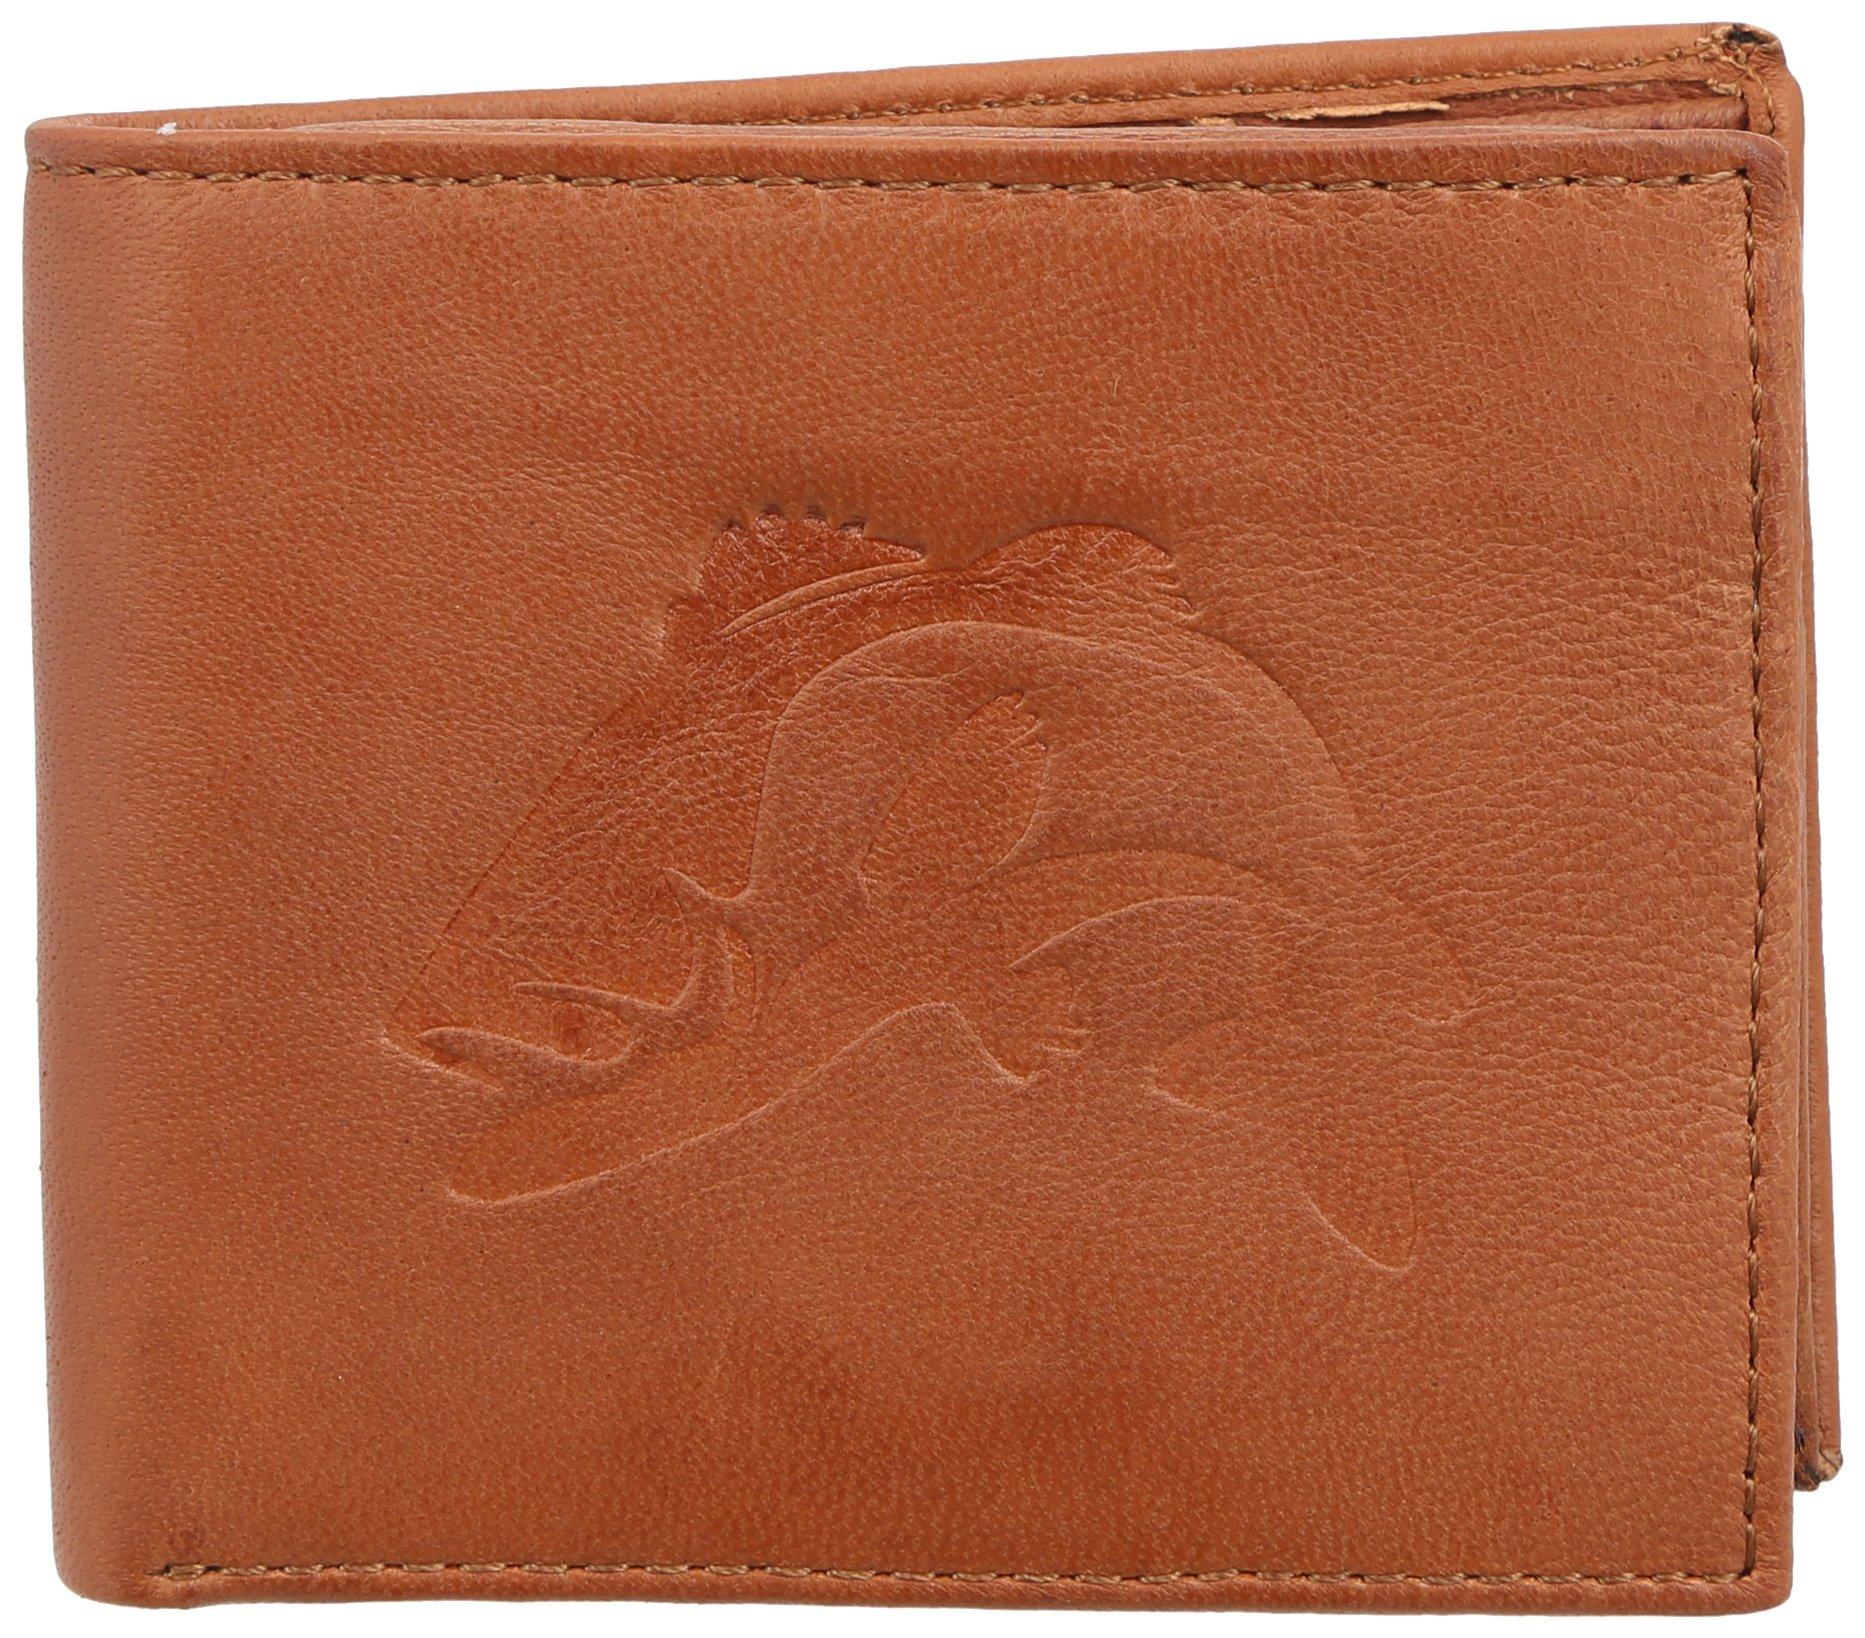 Stone Mountain Mens Fish Leather Passcase Wallet